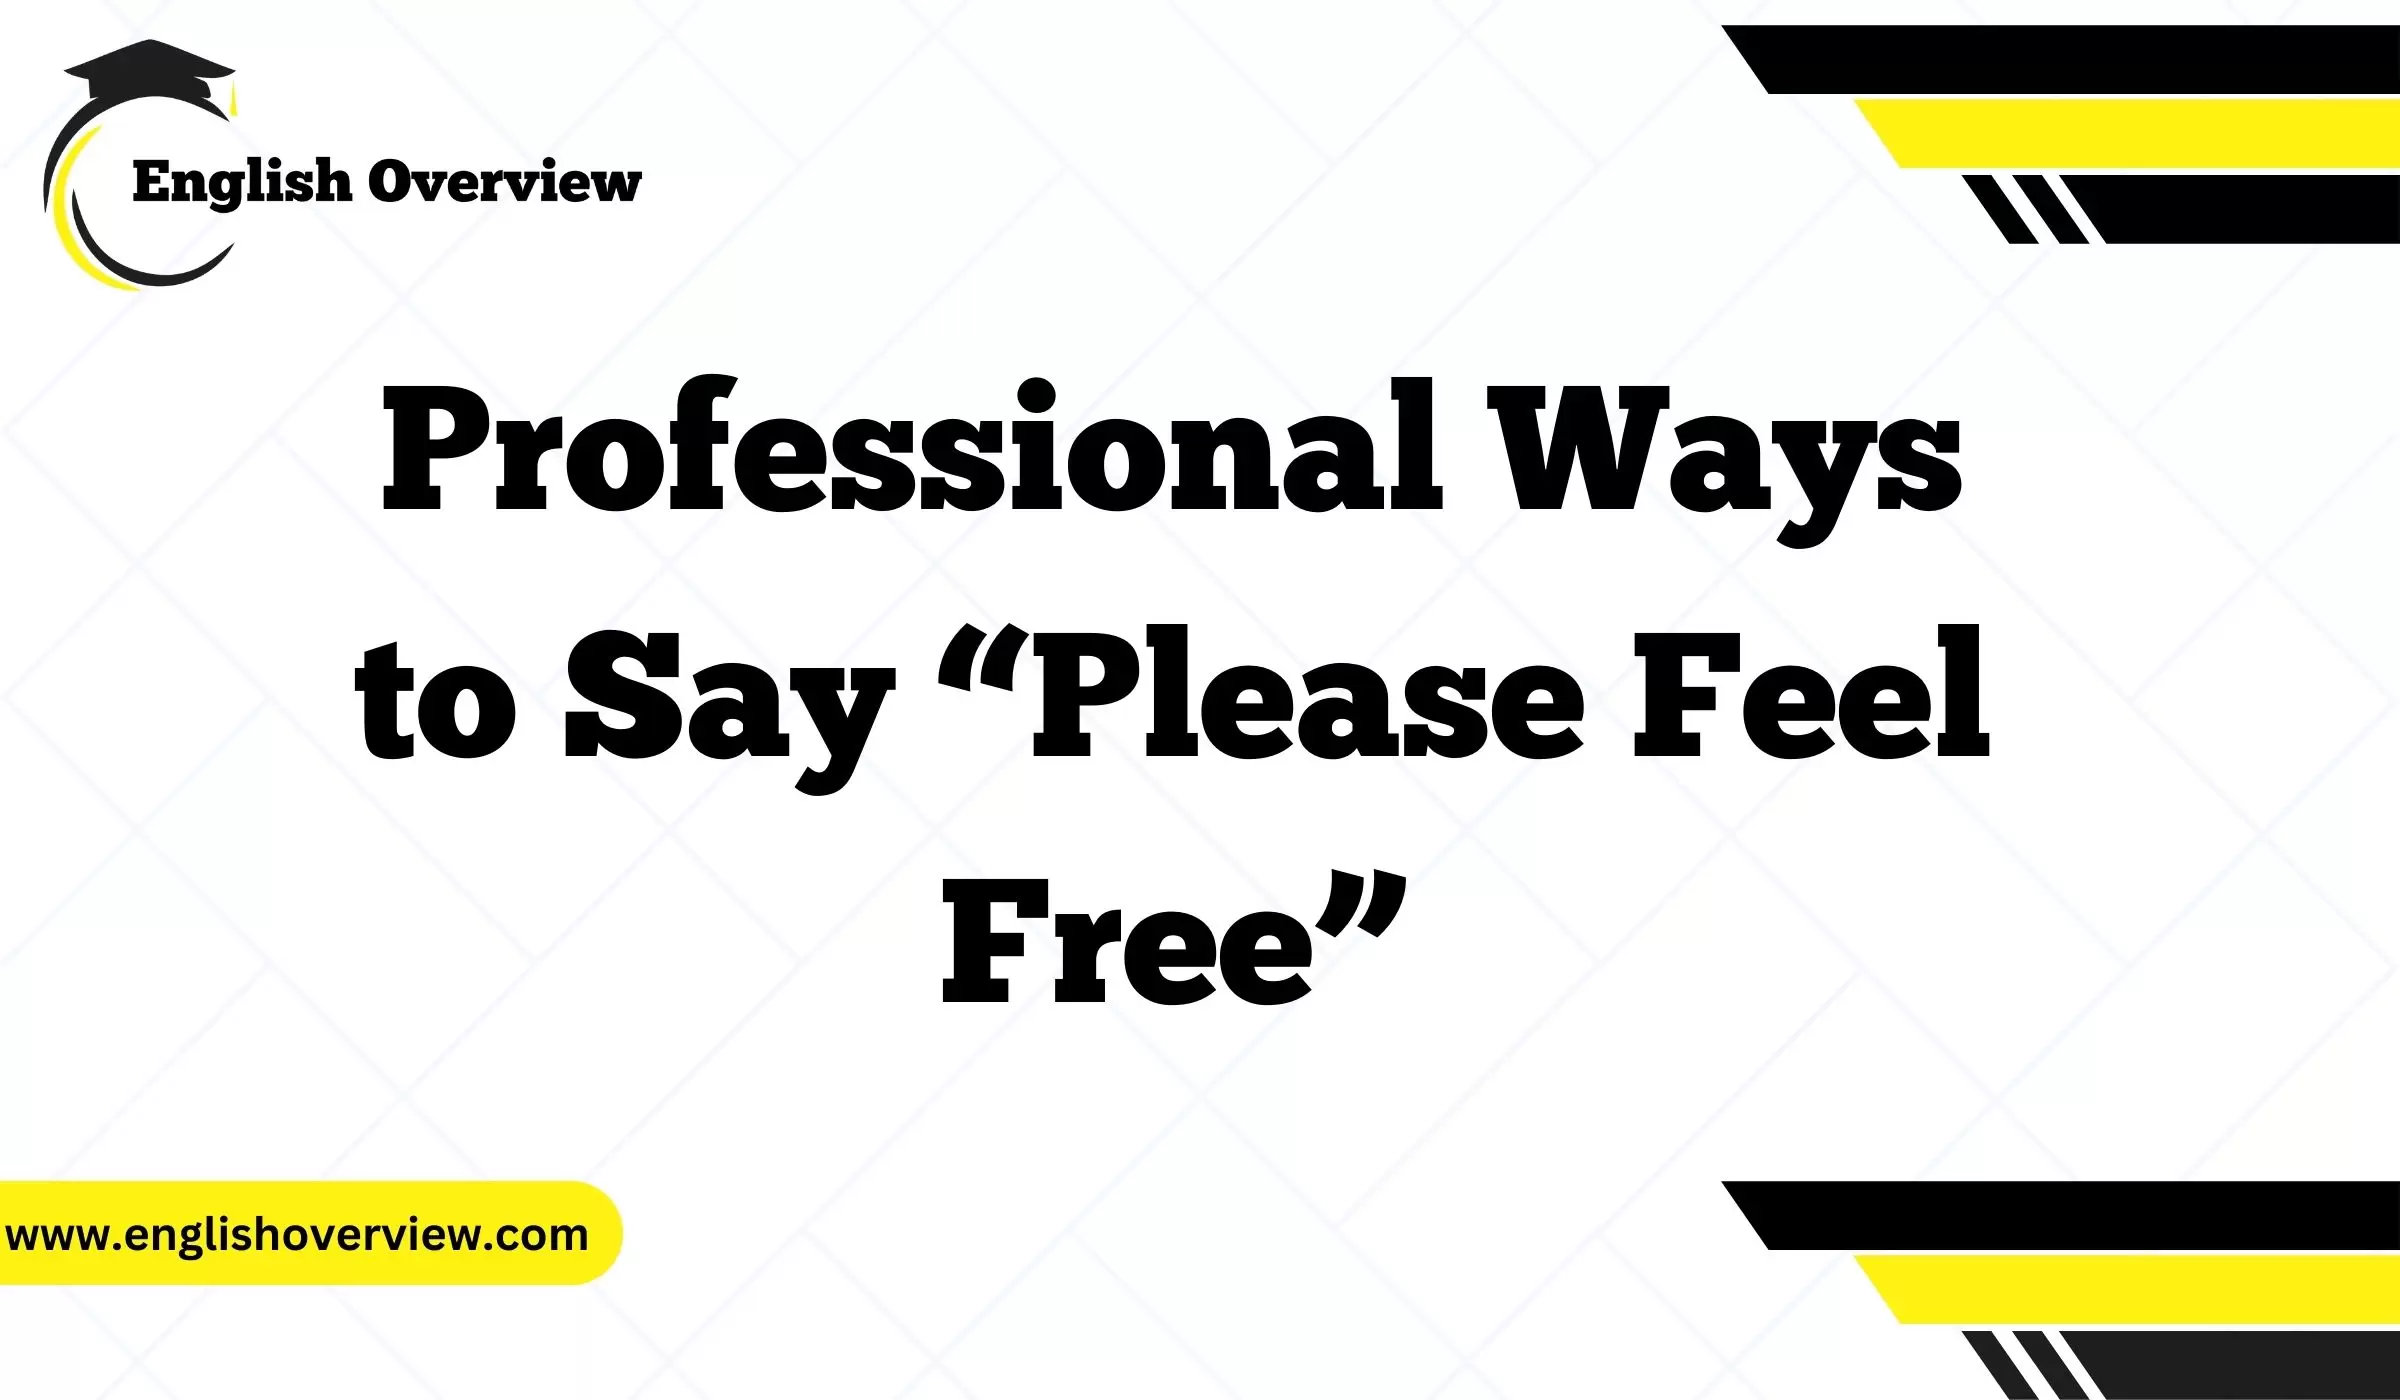 Professional Ways to Say “Please Feel Free”